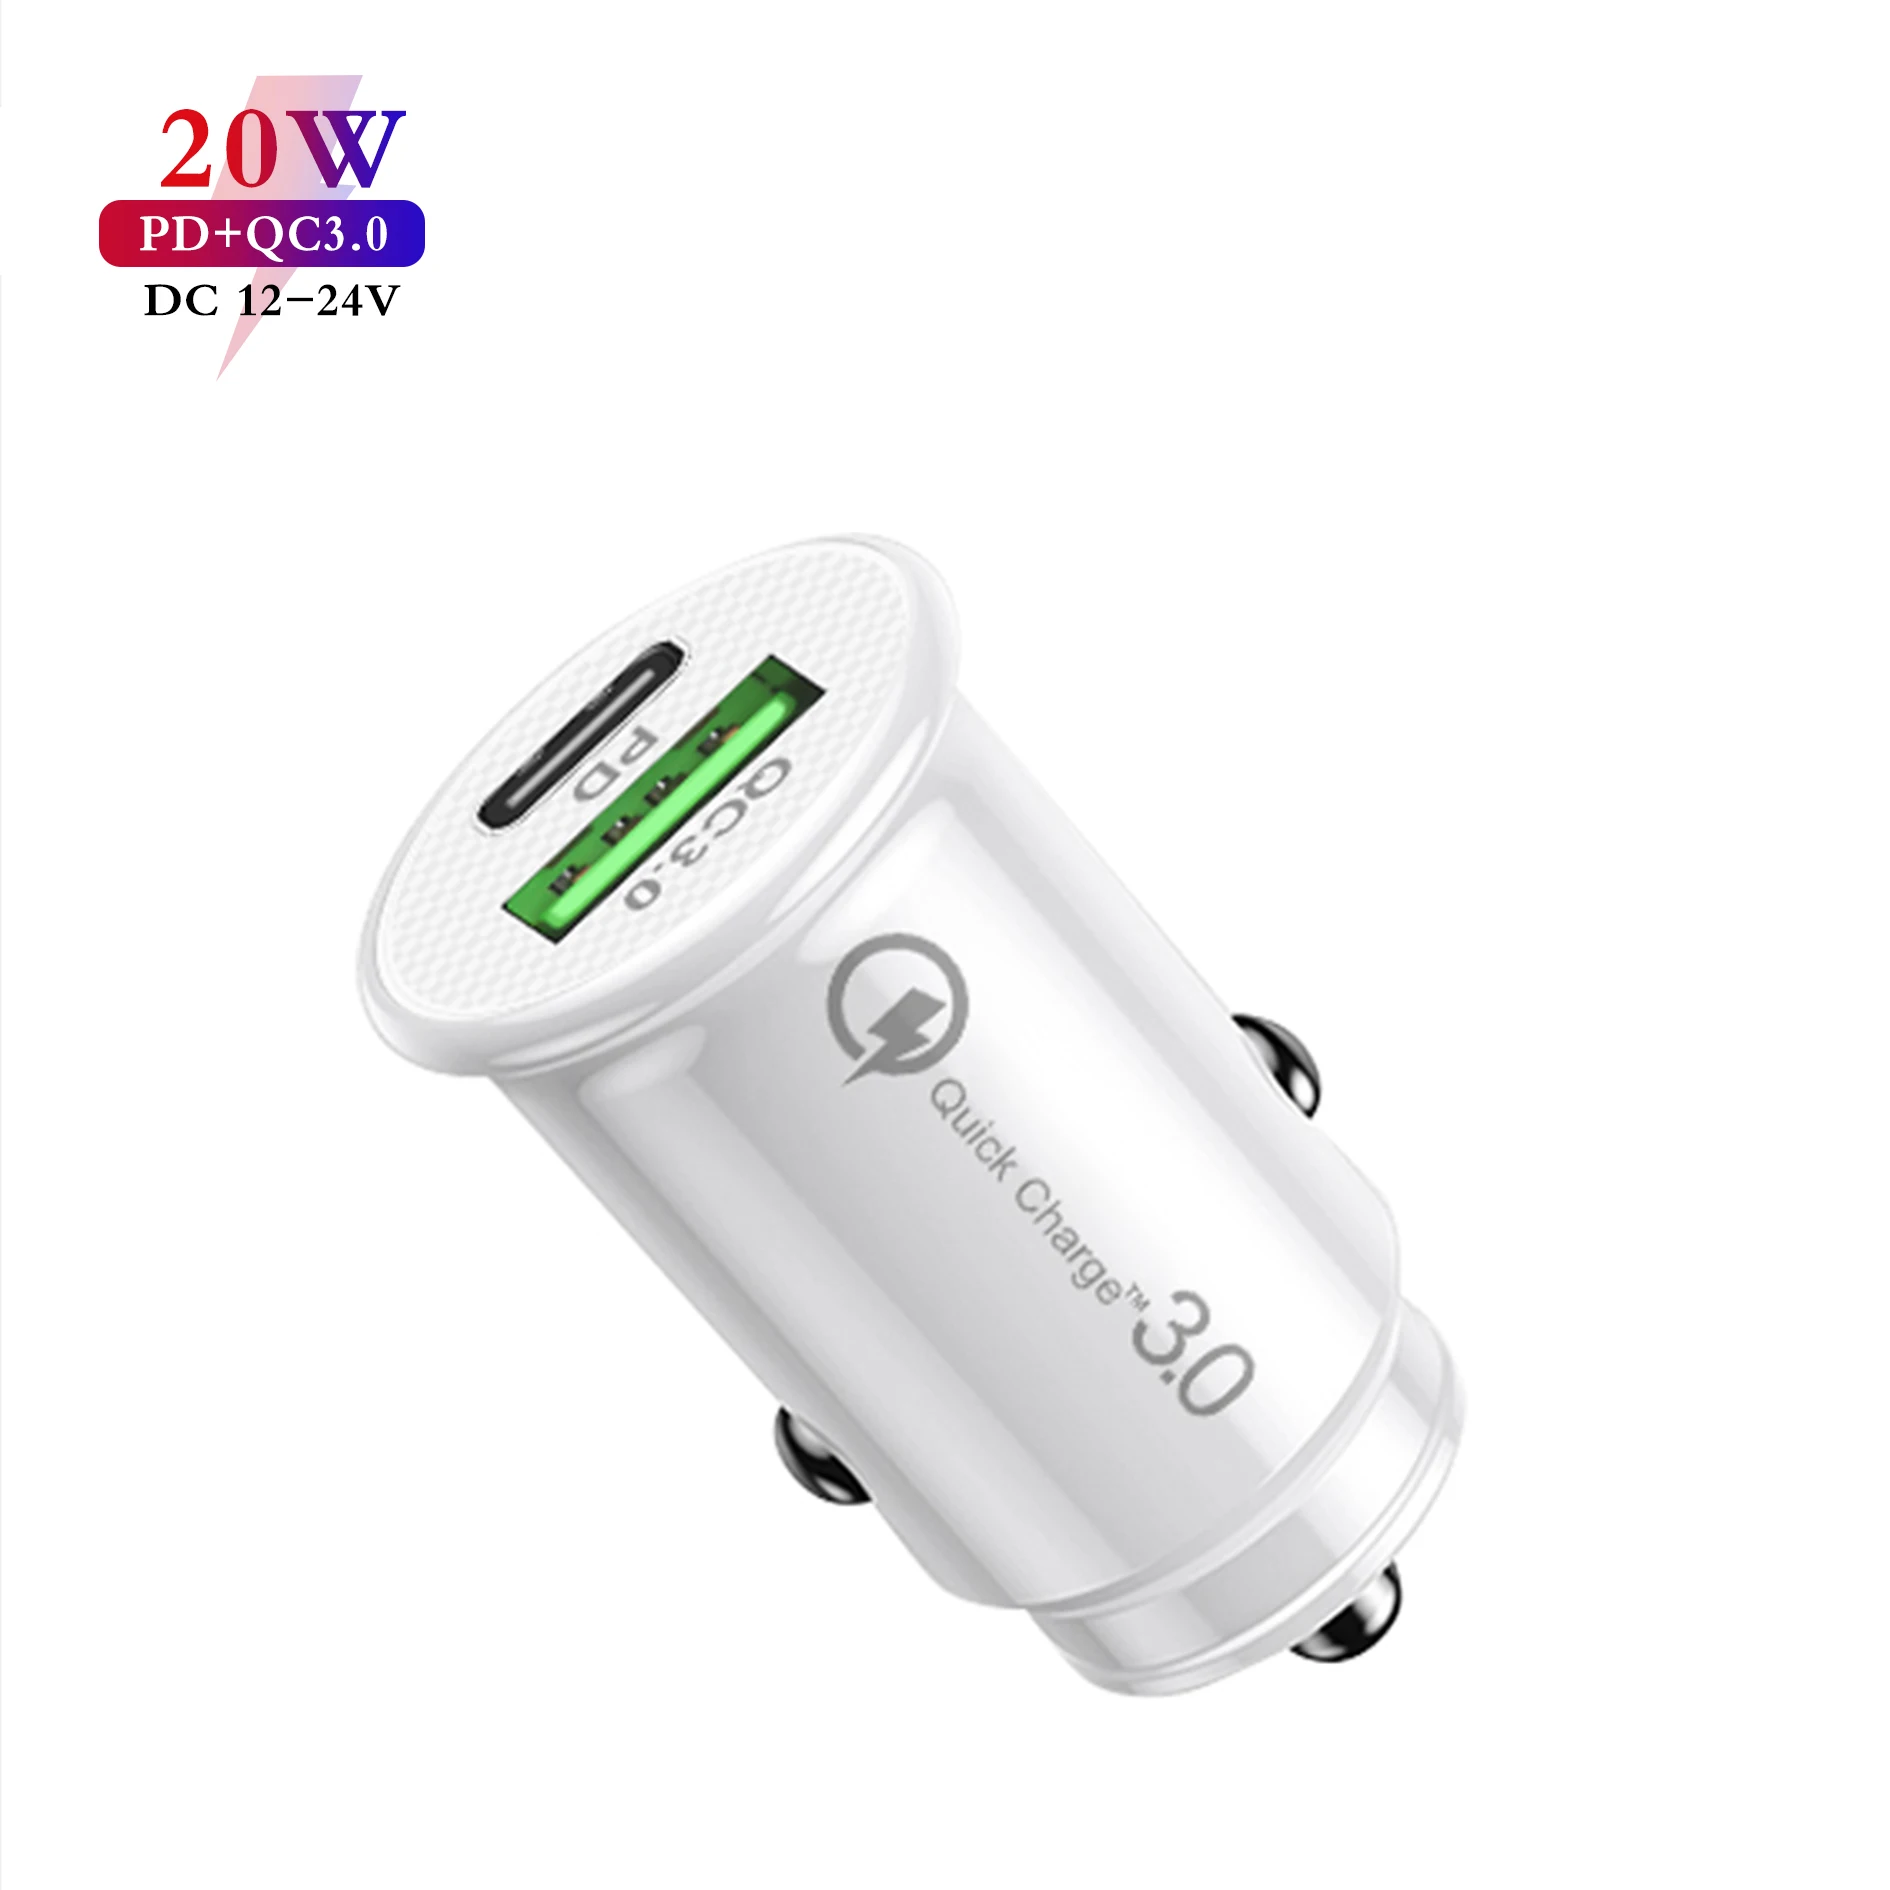 

18W QC3.0 fast charging Fast PD 20W for iPhone USB Type-C Car Charger